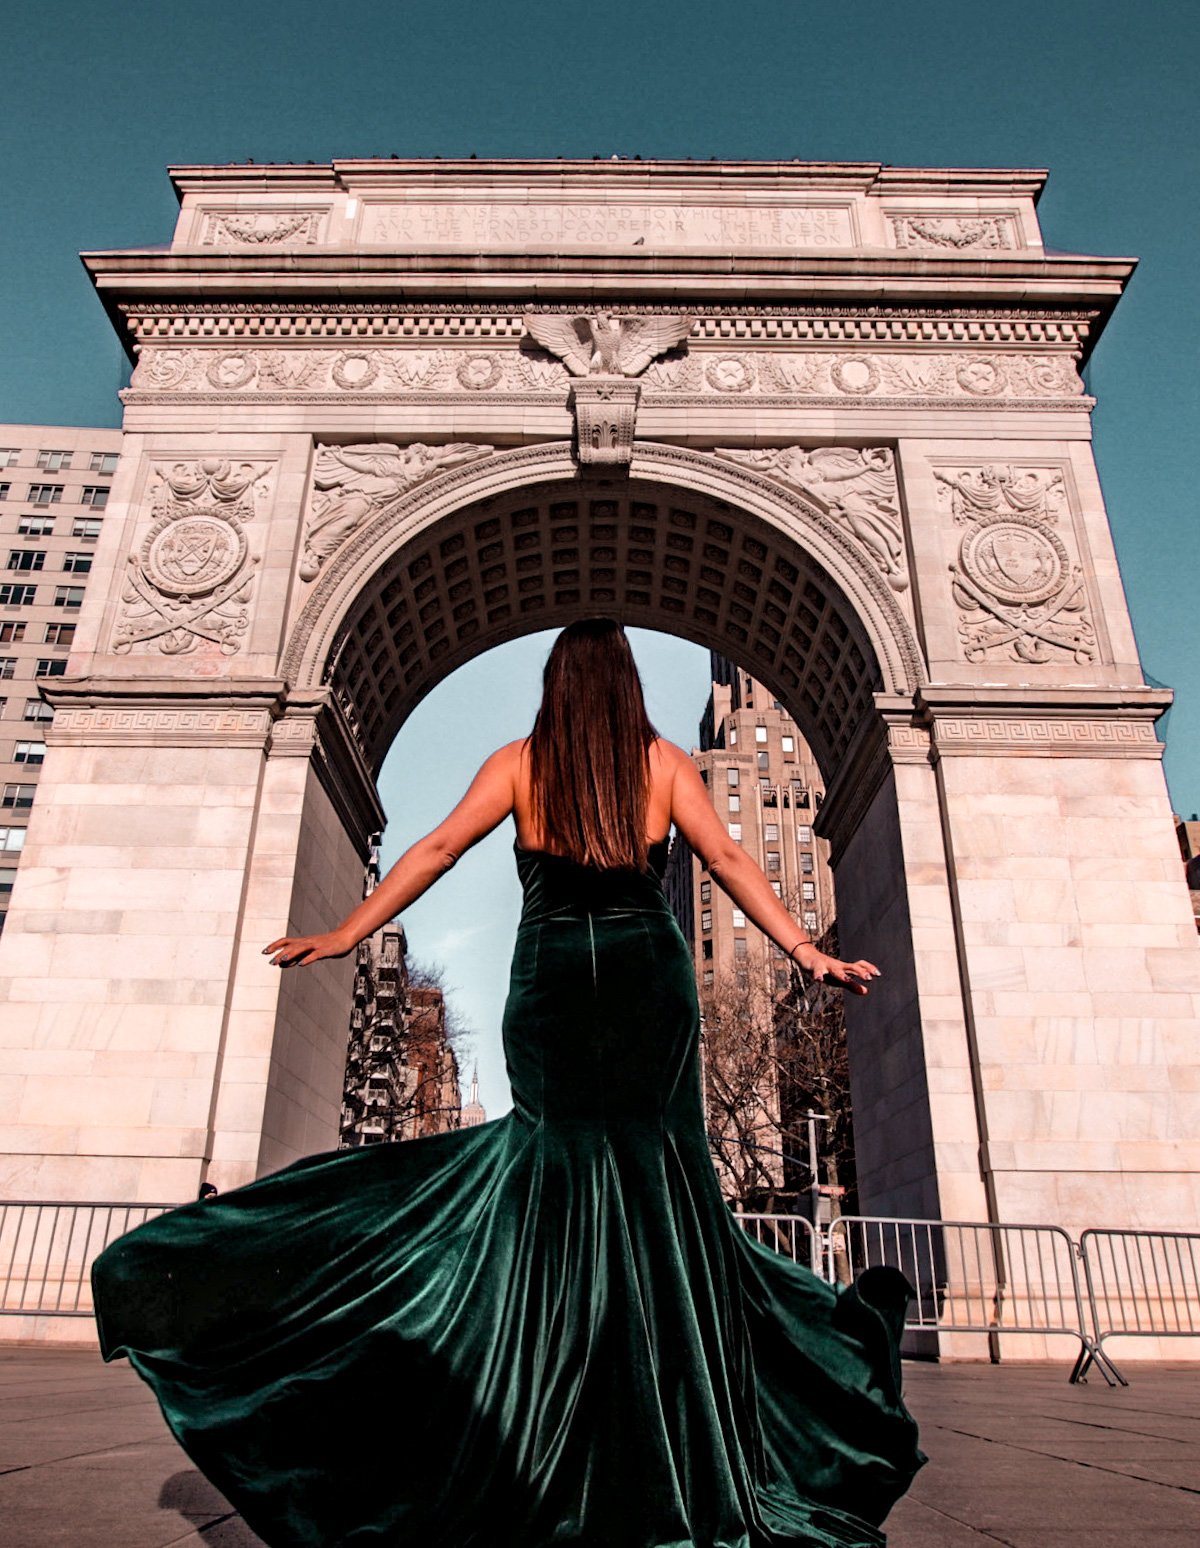 Washington Square, Instagrammable places in NYC